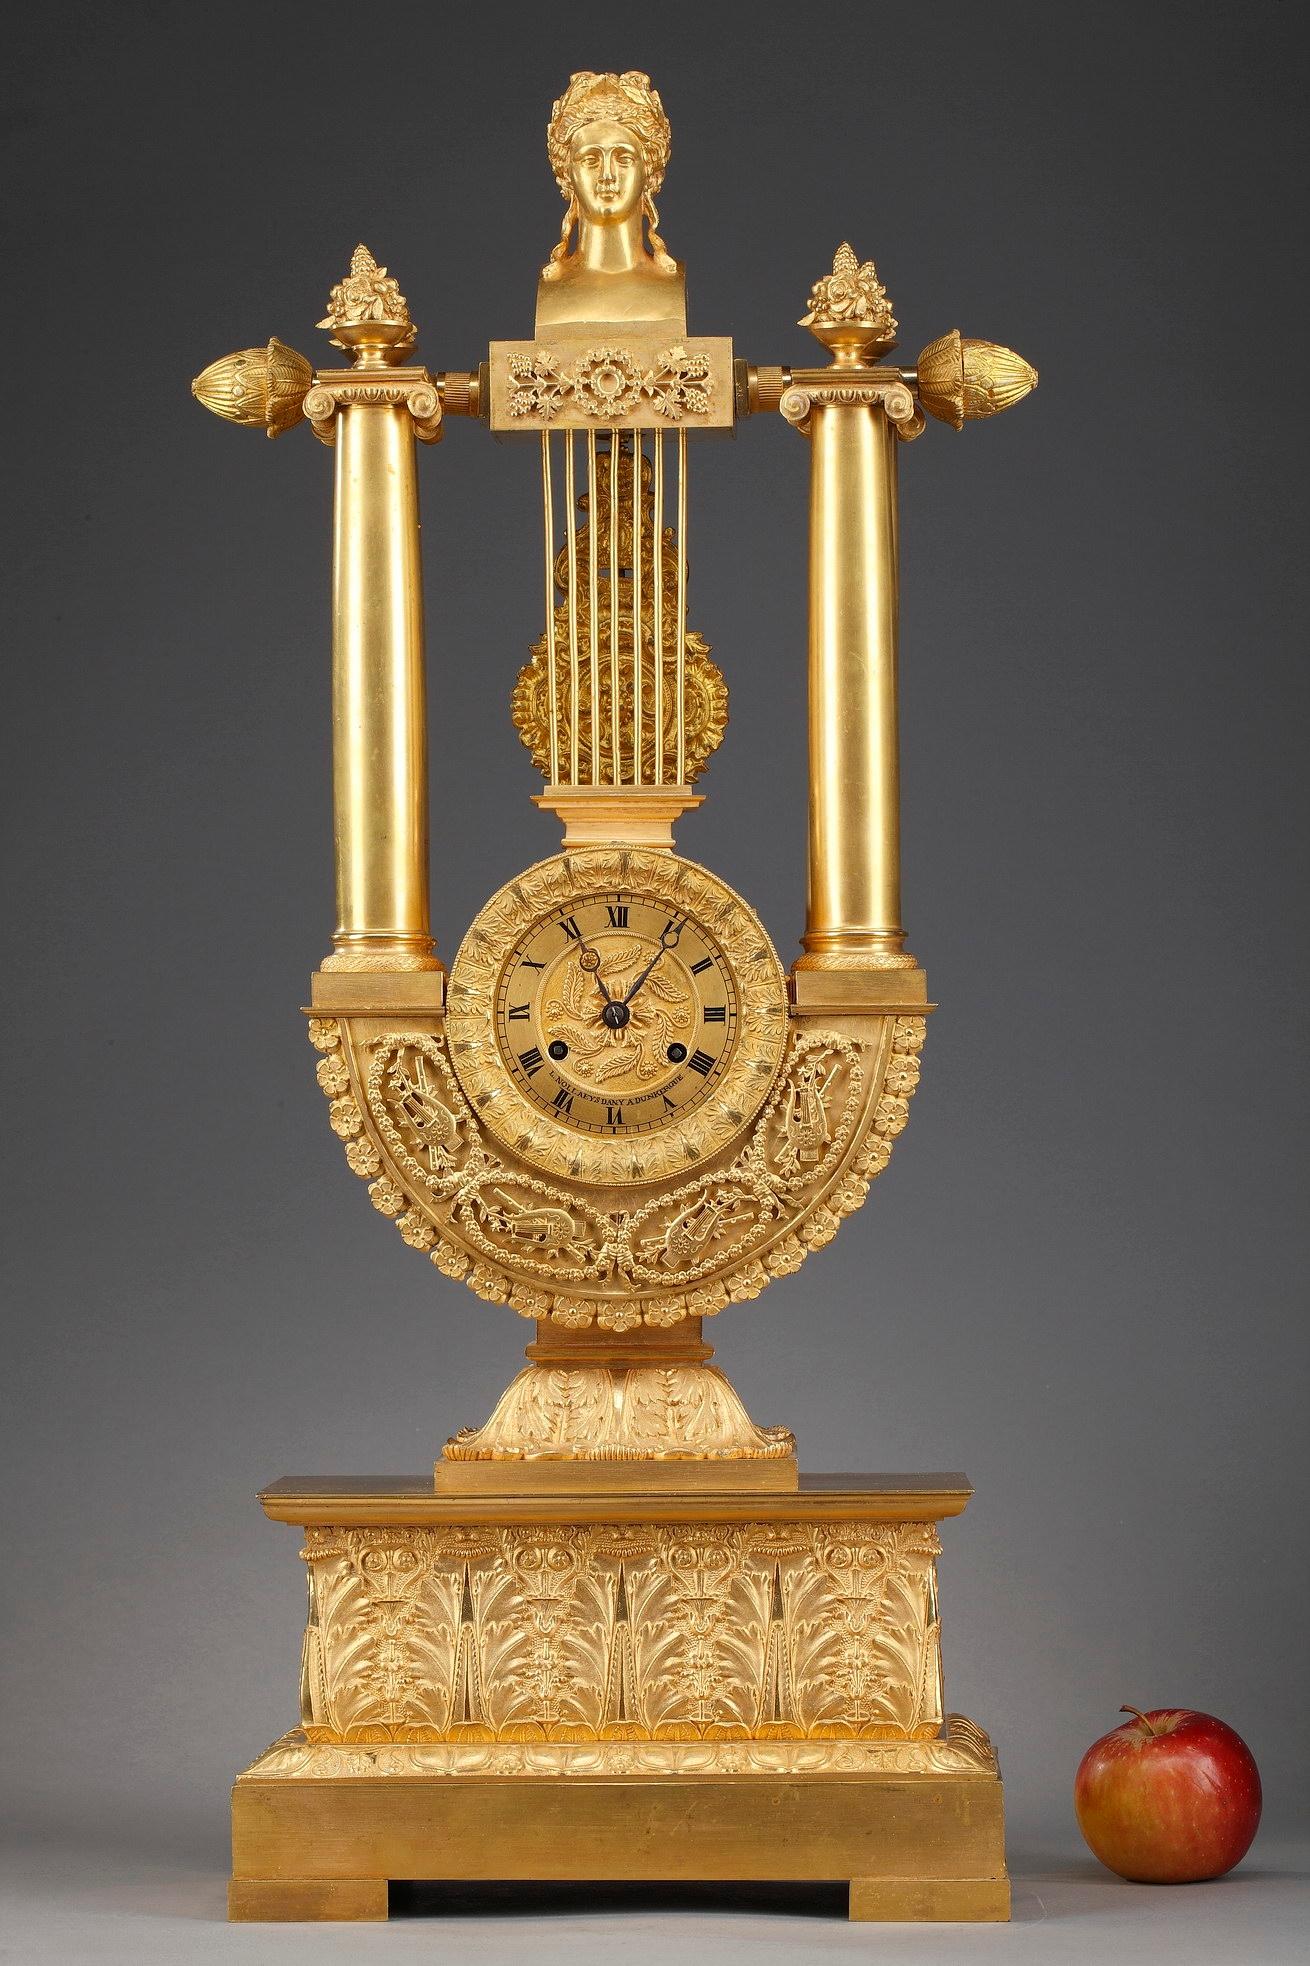 Designed in the Empire style, this large mantel clock is mounted in a beautiful lyre-form ormolu frame accentuated by exquisitely detailed decoration composed of acanthus leaves, flowers and music trophies. The gilt bronze dial is signed: 